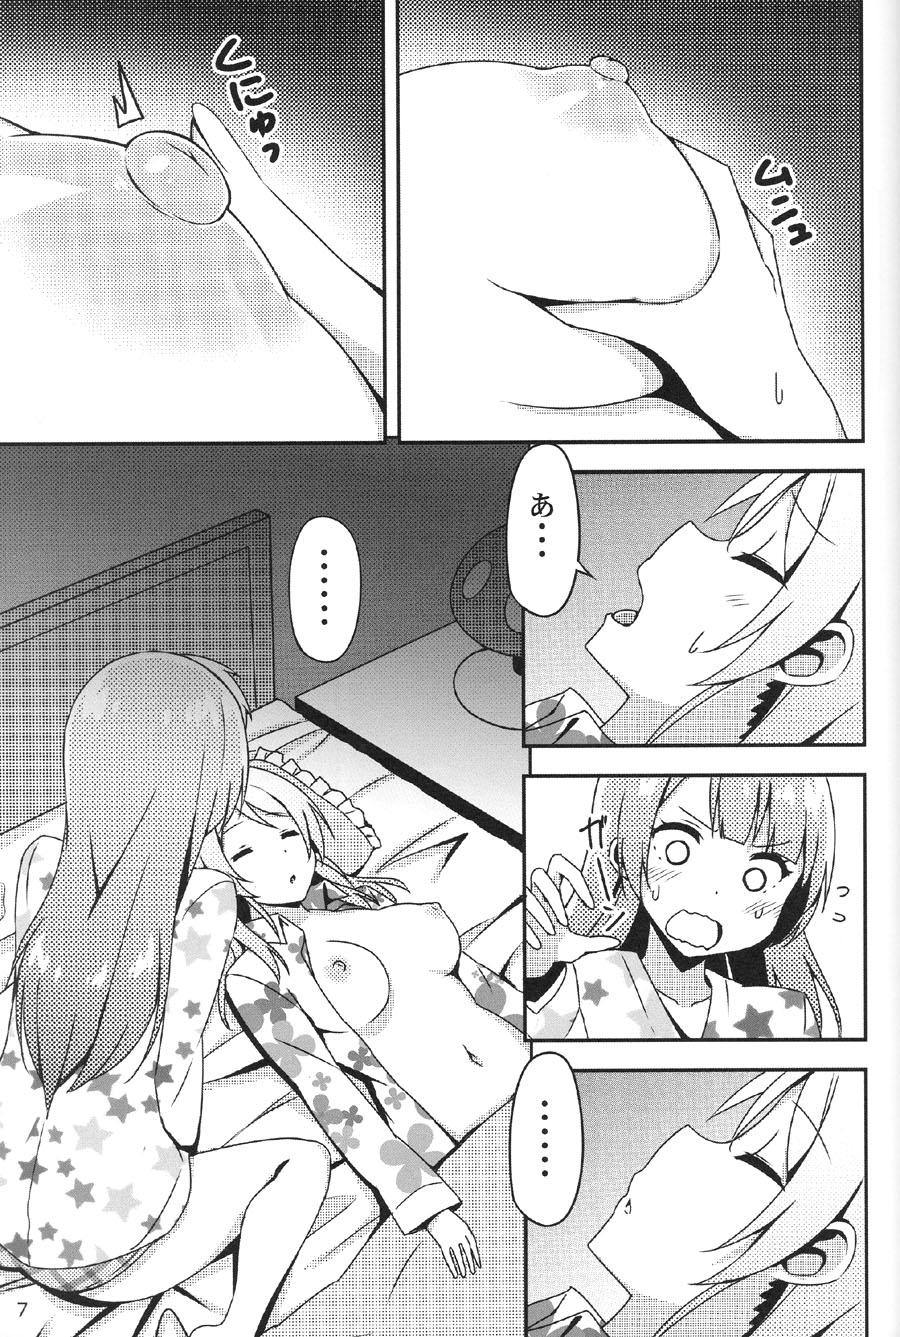 Euro Endless Love - Love live Lick - Page 6